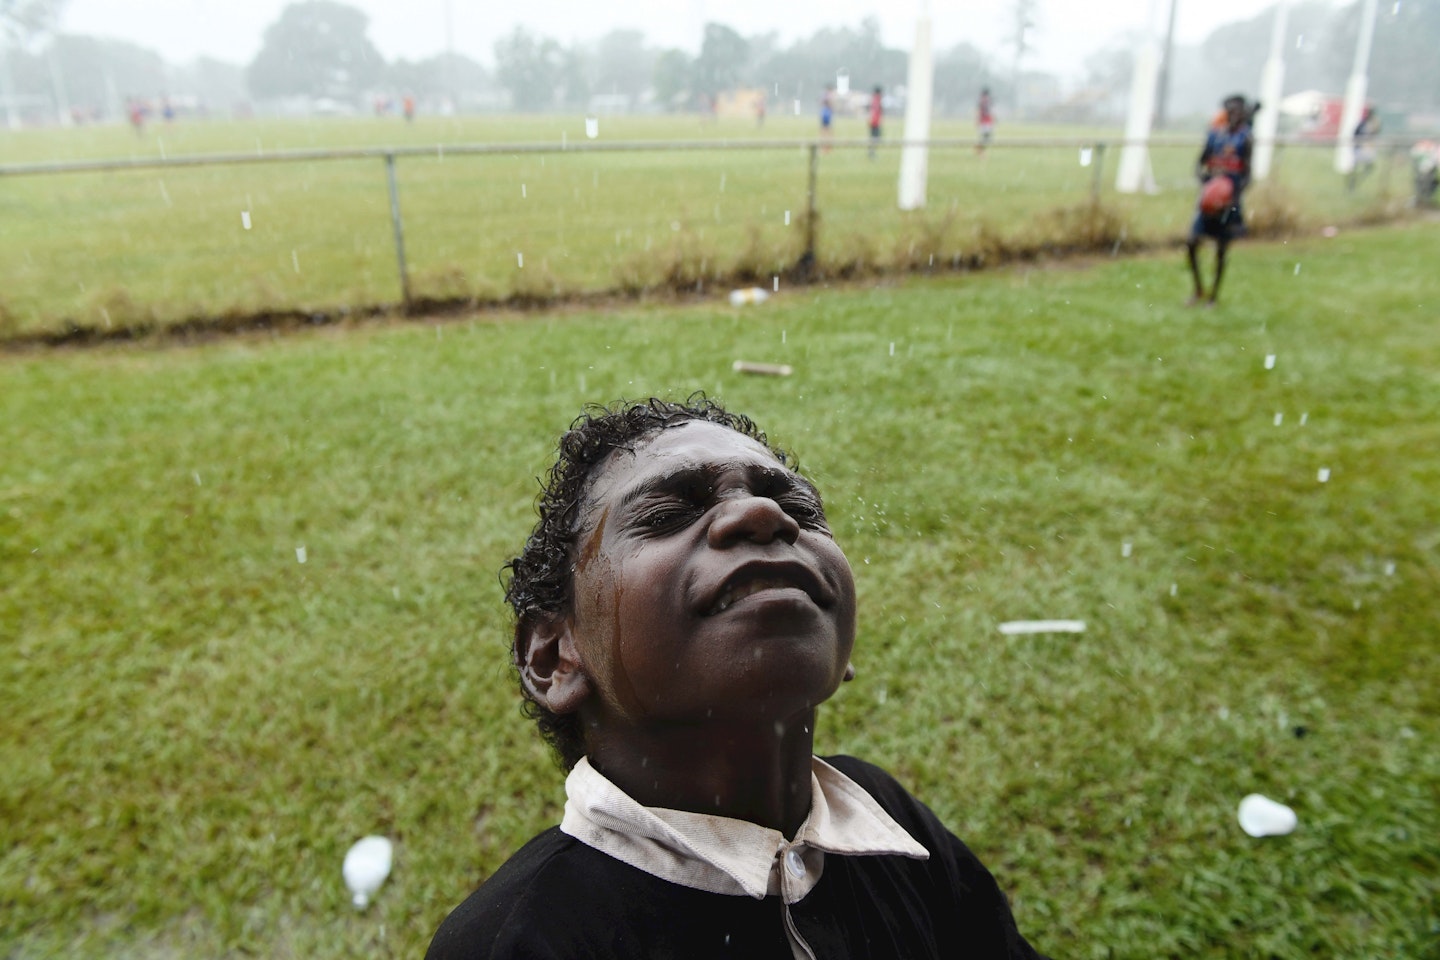 A young football fan feels the rain on his face minutes before kick-off for the Tiwi Islands grand final – the muddiest game of football.